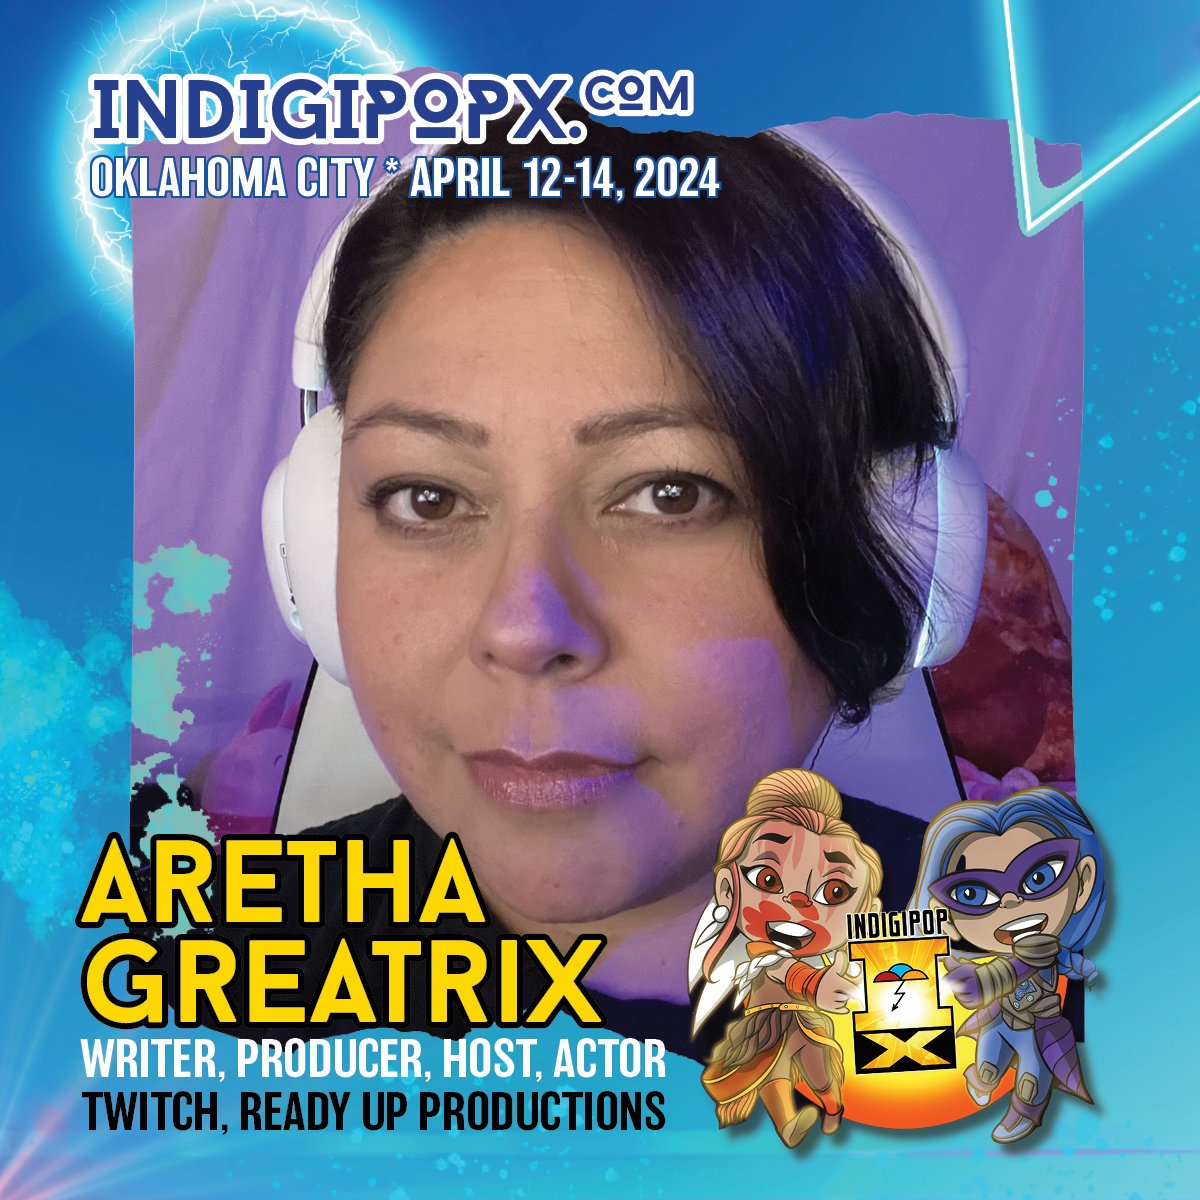 #IndigipopX2024 welcomes gaming maven ARET HA GREATRIX this year. Aretha is on our Gaming is Rez-illience panel on Fri. + the Careers in Gaming panel Sat. simplyaretha.com 📍@FAMokMuseum 📆 April 12-14, 2024 🎟️ indigipopx.com (tix + info) #IPXatFAM #Indiginerds